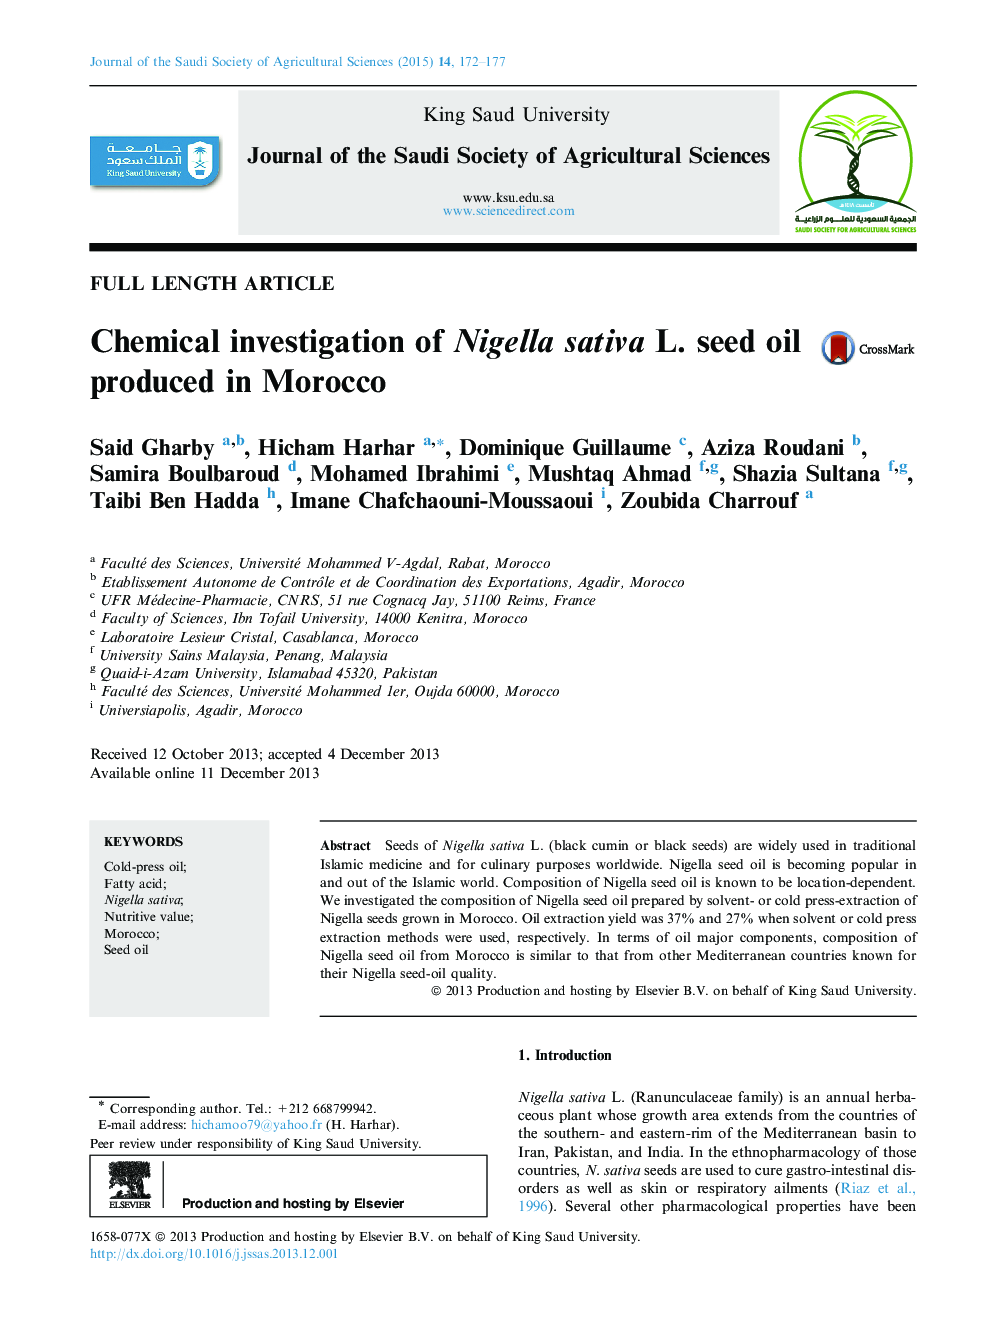 Chemical investigation of Nigella sativa L. seed oil produced in Morocco 